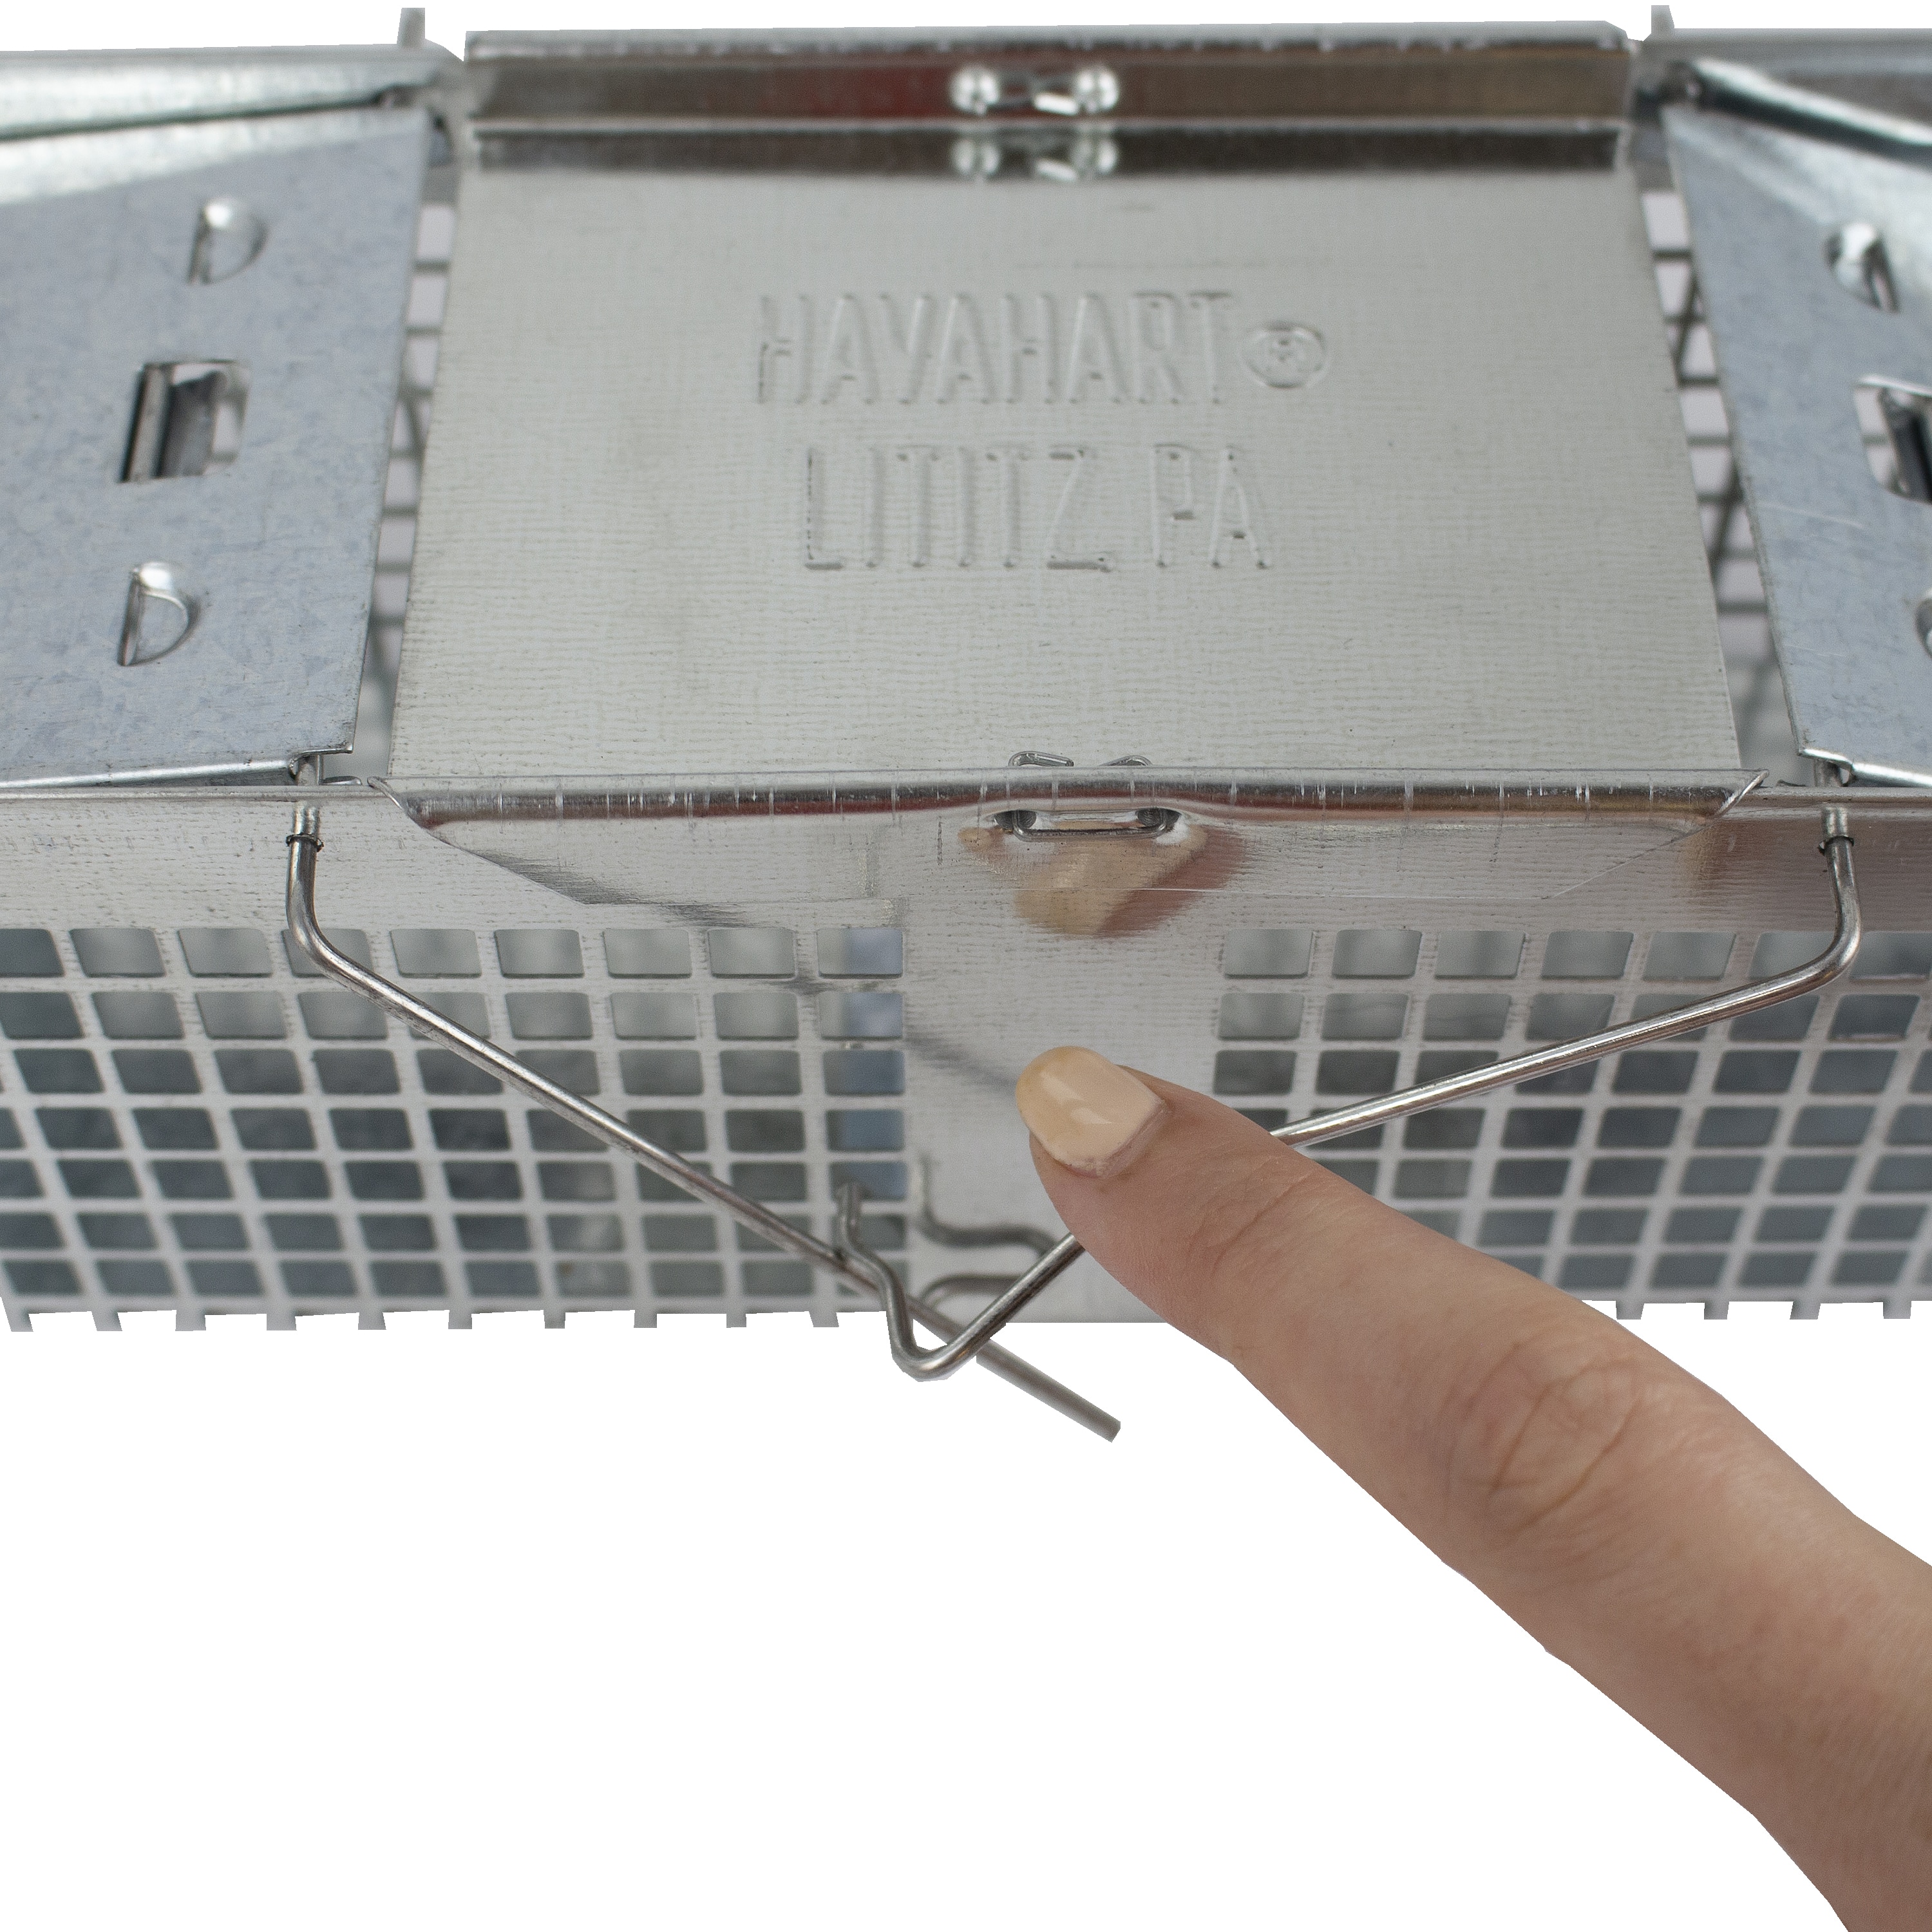 HAVAHART LIVE ANIMAL CAGE TRAP IN BOX - Earl's Auction Company